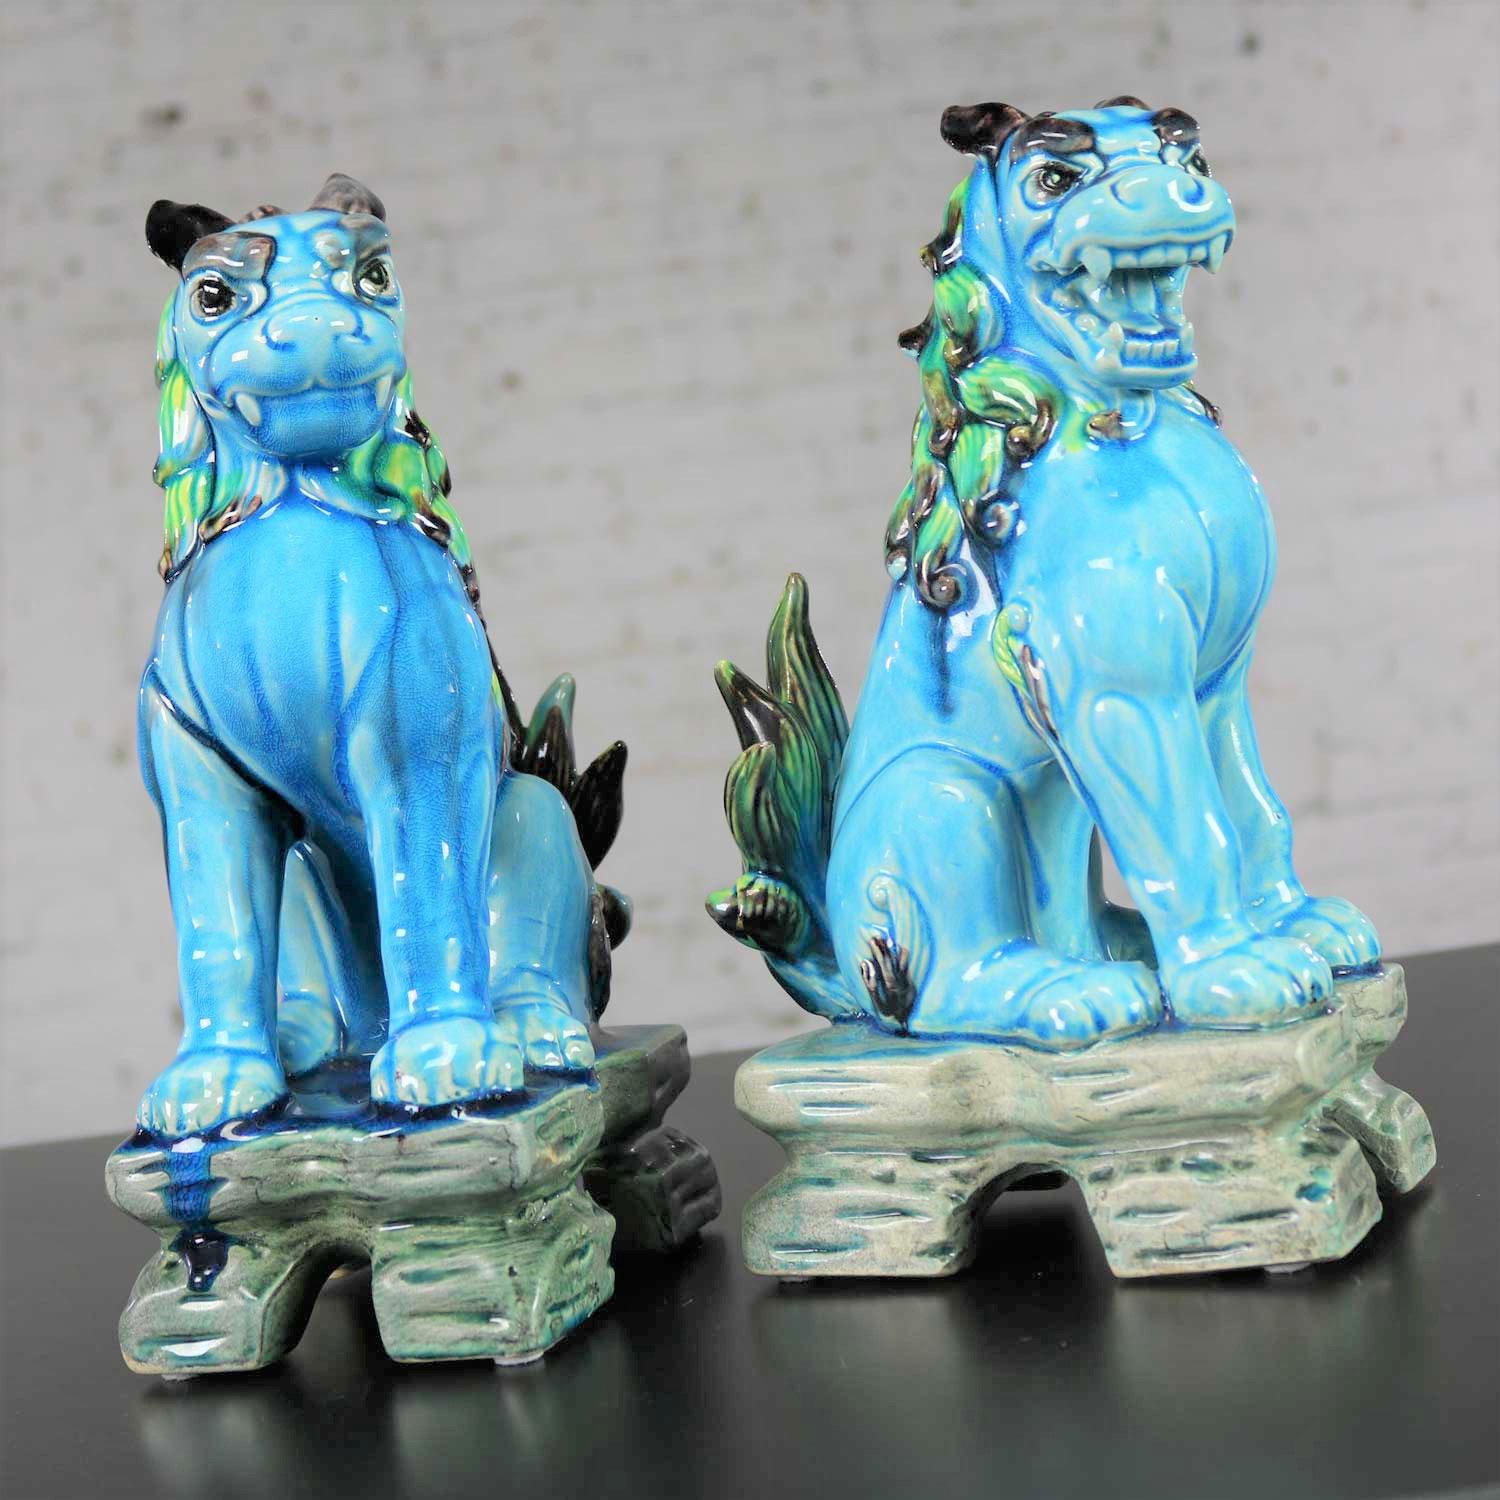 Awesome pair of vintage midcentury Japanese Komainu or Lion Dogs in ceramic with a gorgeous glaze that is primarily turquoise green but mixed with many other wonderful colors of greens and blues and blacks and browns. They are in fabulous vintage